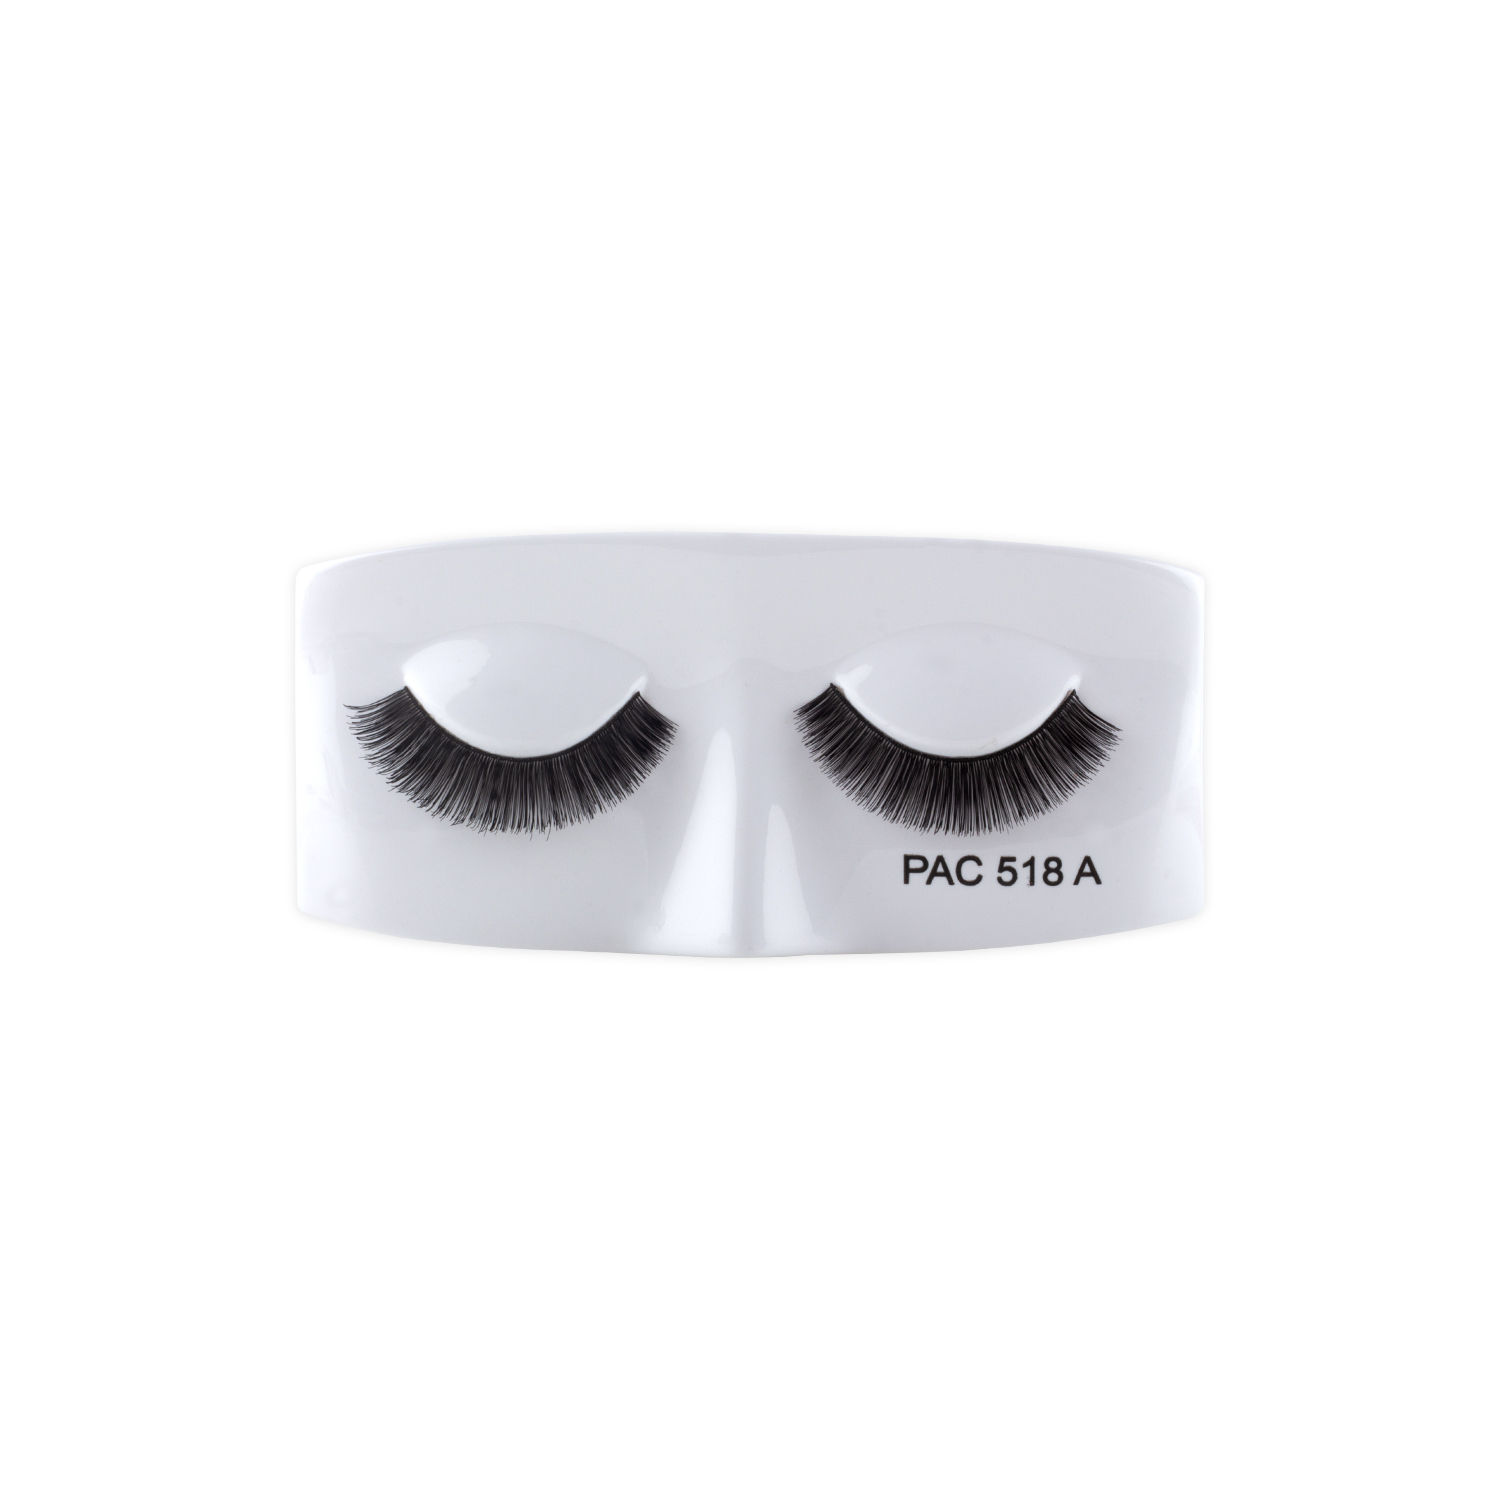 PAC Tapered Lash - 518 A